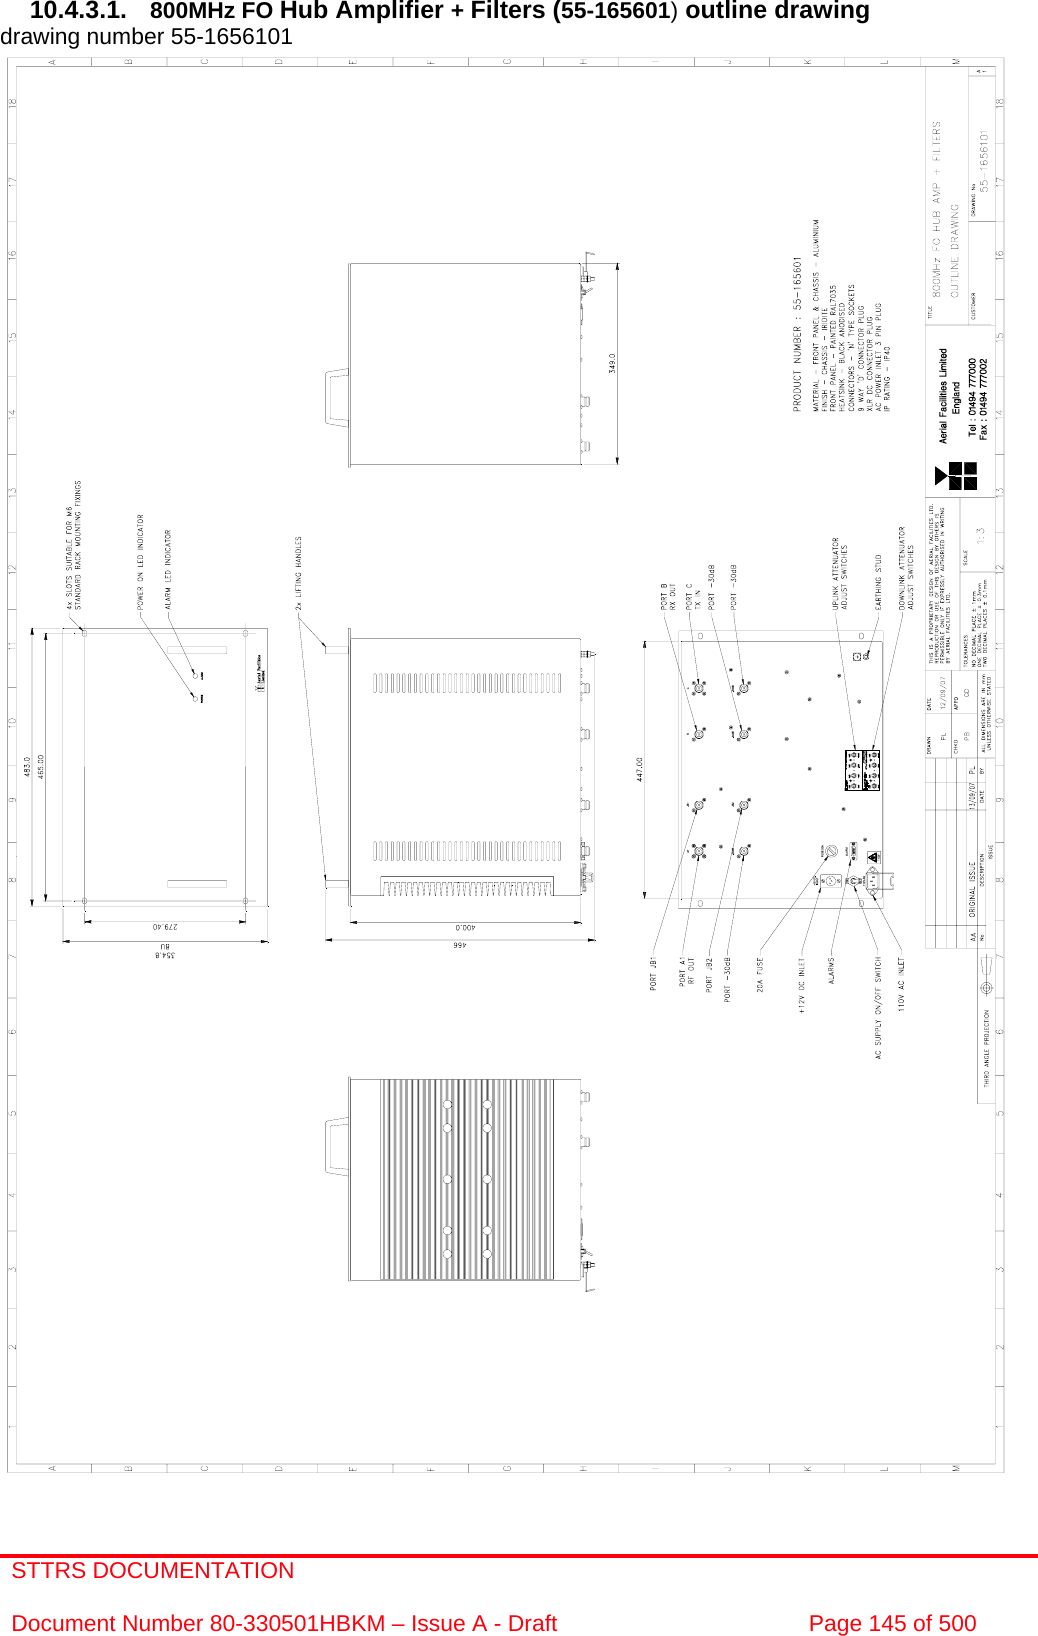 STTRS DOCUMENTATION  Document Number 80-330501HBKM – Issue A - Draft  Page 145 of 500   10.4.3.1.  800MHz FO Hub Amplifier + Filters (55-165601) outline drawing drawing number 55-1656101                                                    